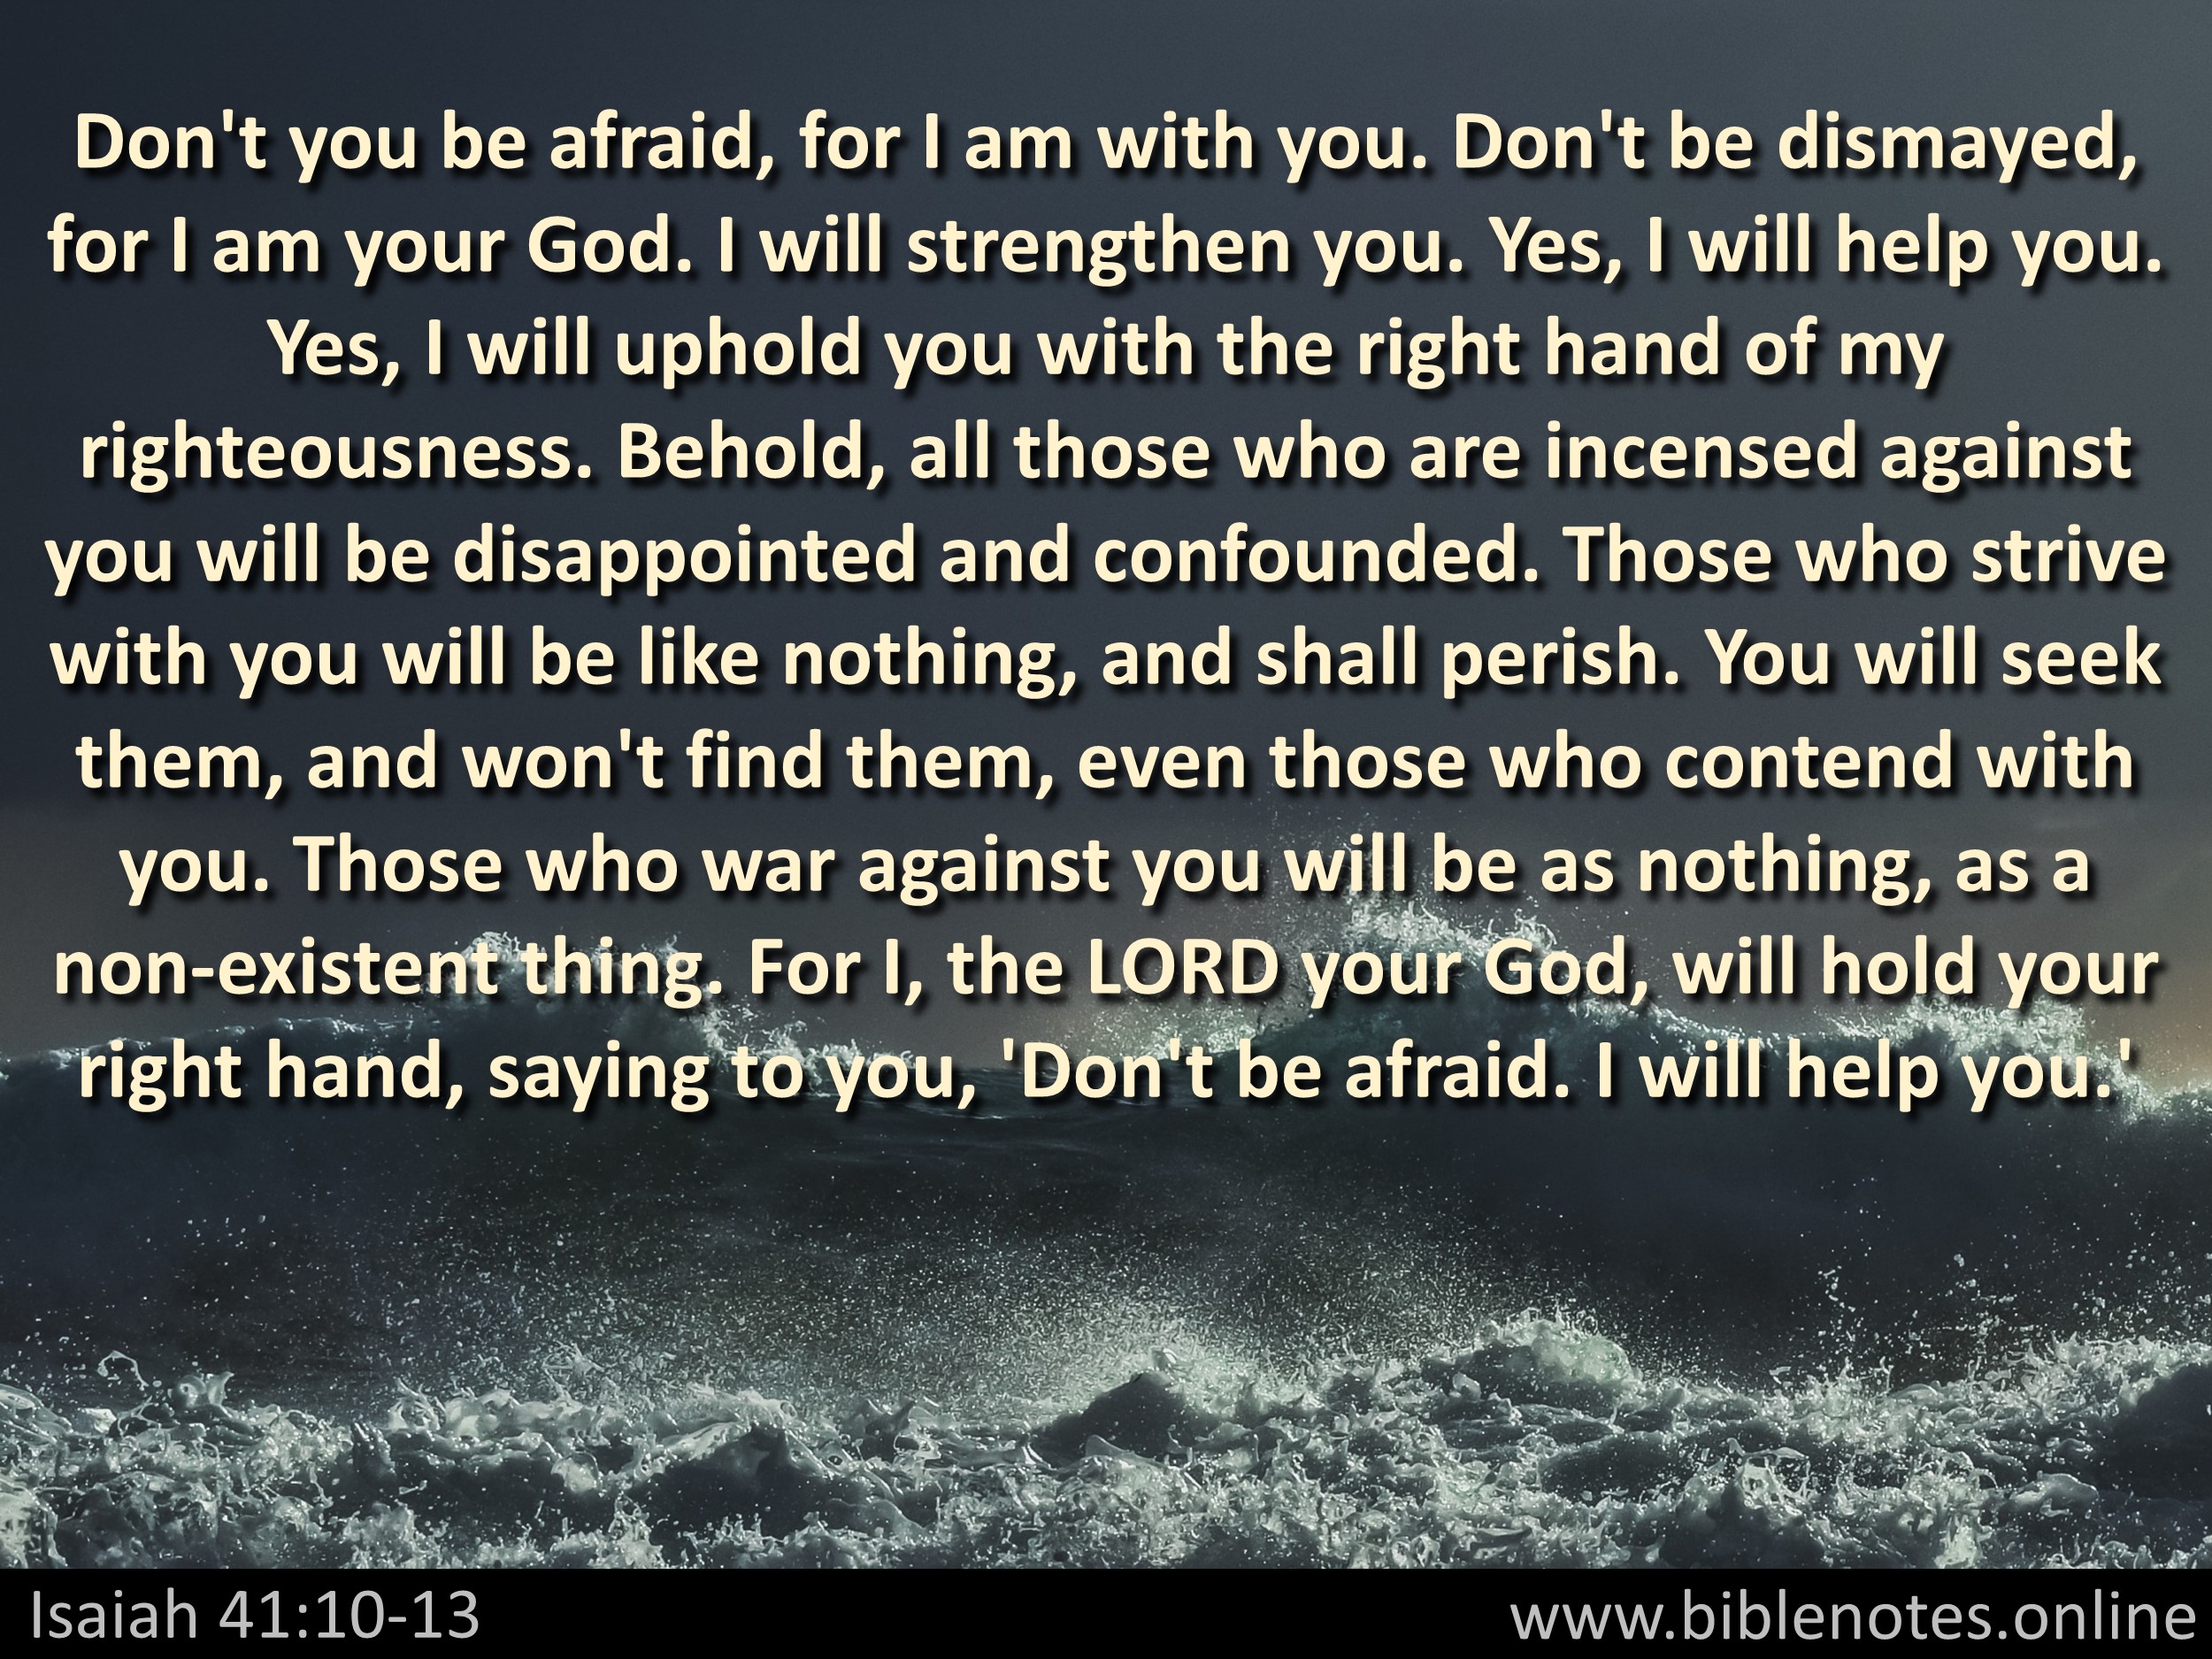 Bible Verse from Isaiah Chapter 41